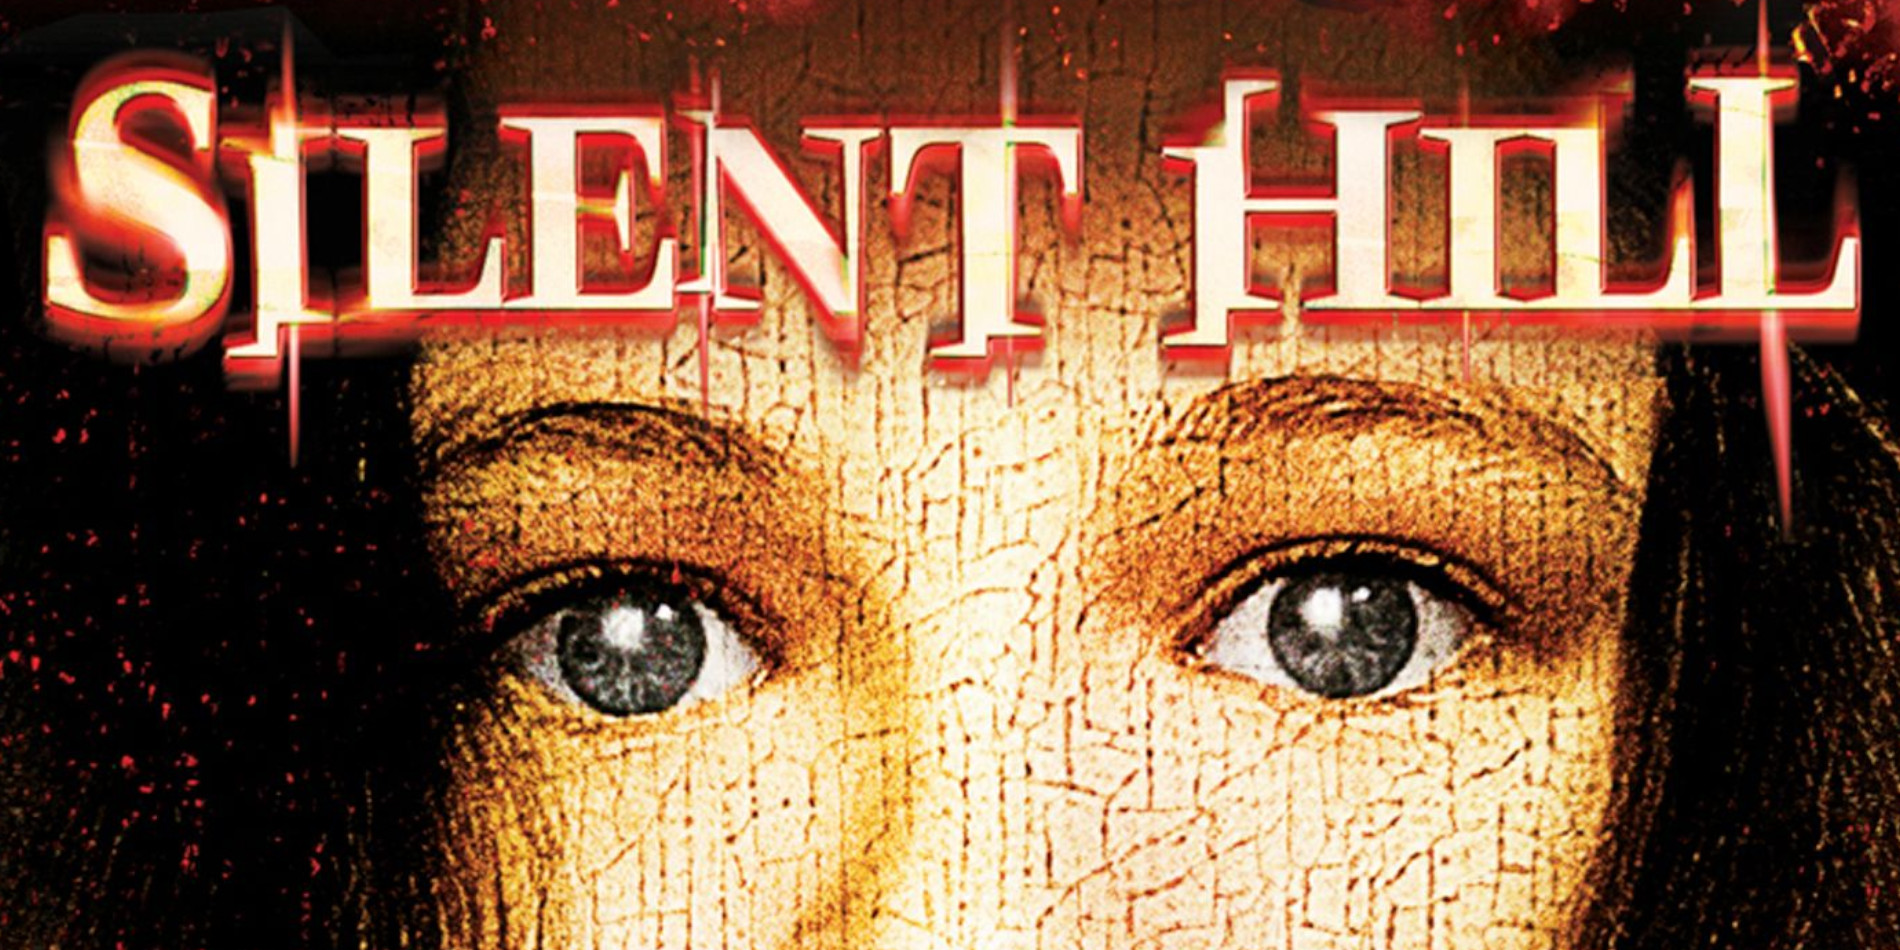 Where Can I Watch the First 'Silent Hill' Movie?